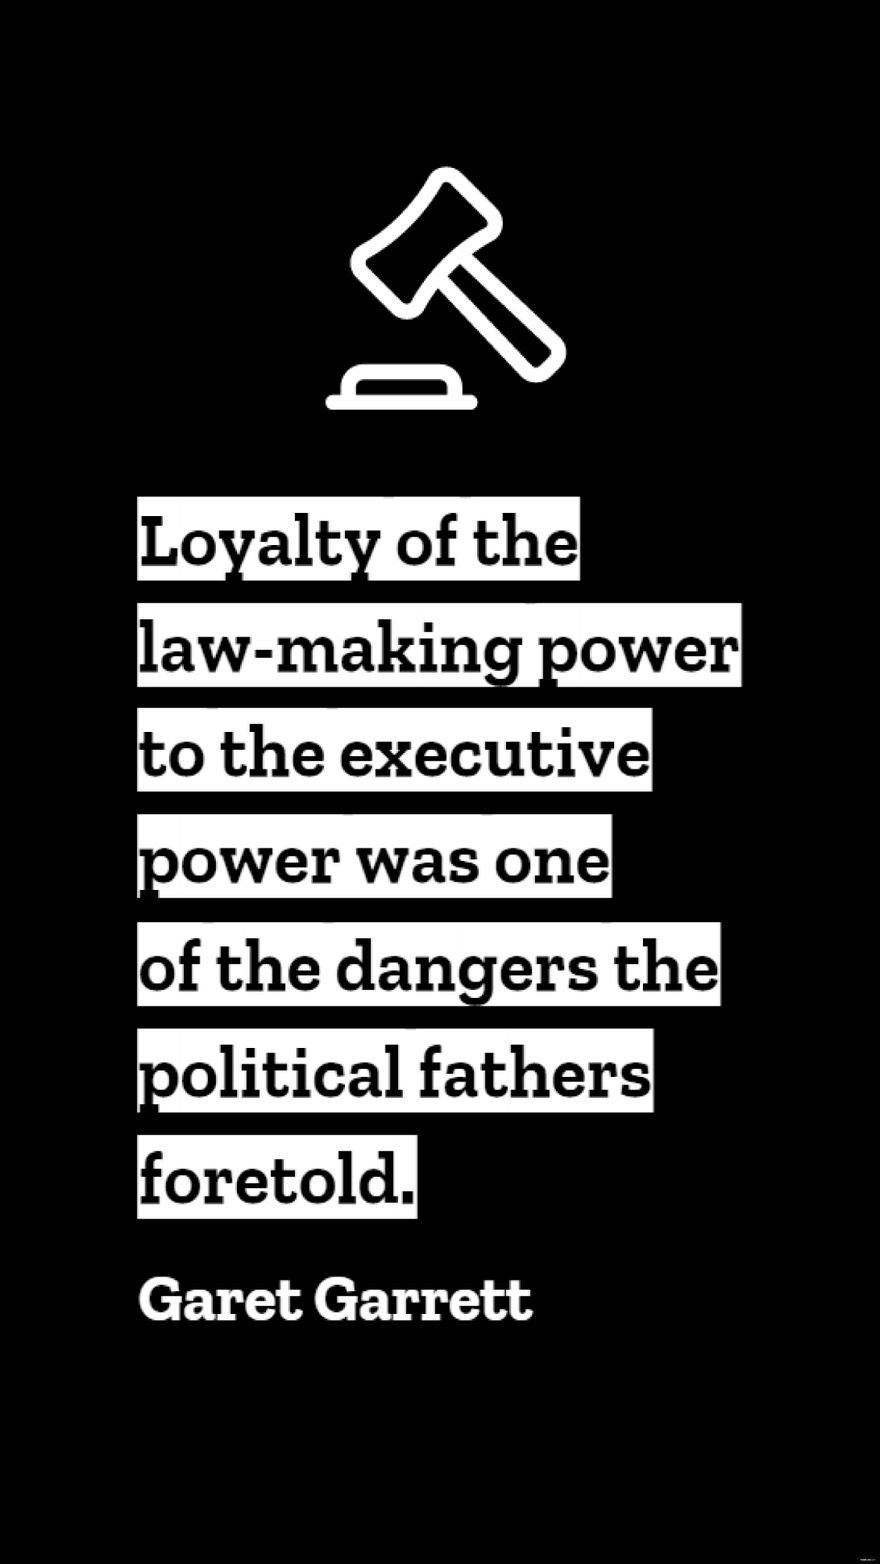 Garet Garrett - Loyalty of the law-making power to the executive power was one of the dangers the political fathers foretold. in JPG